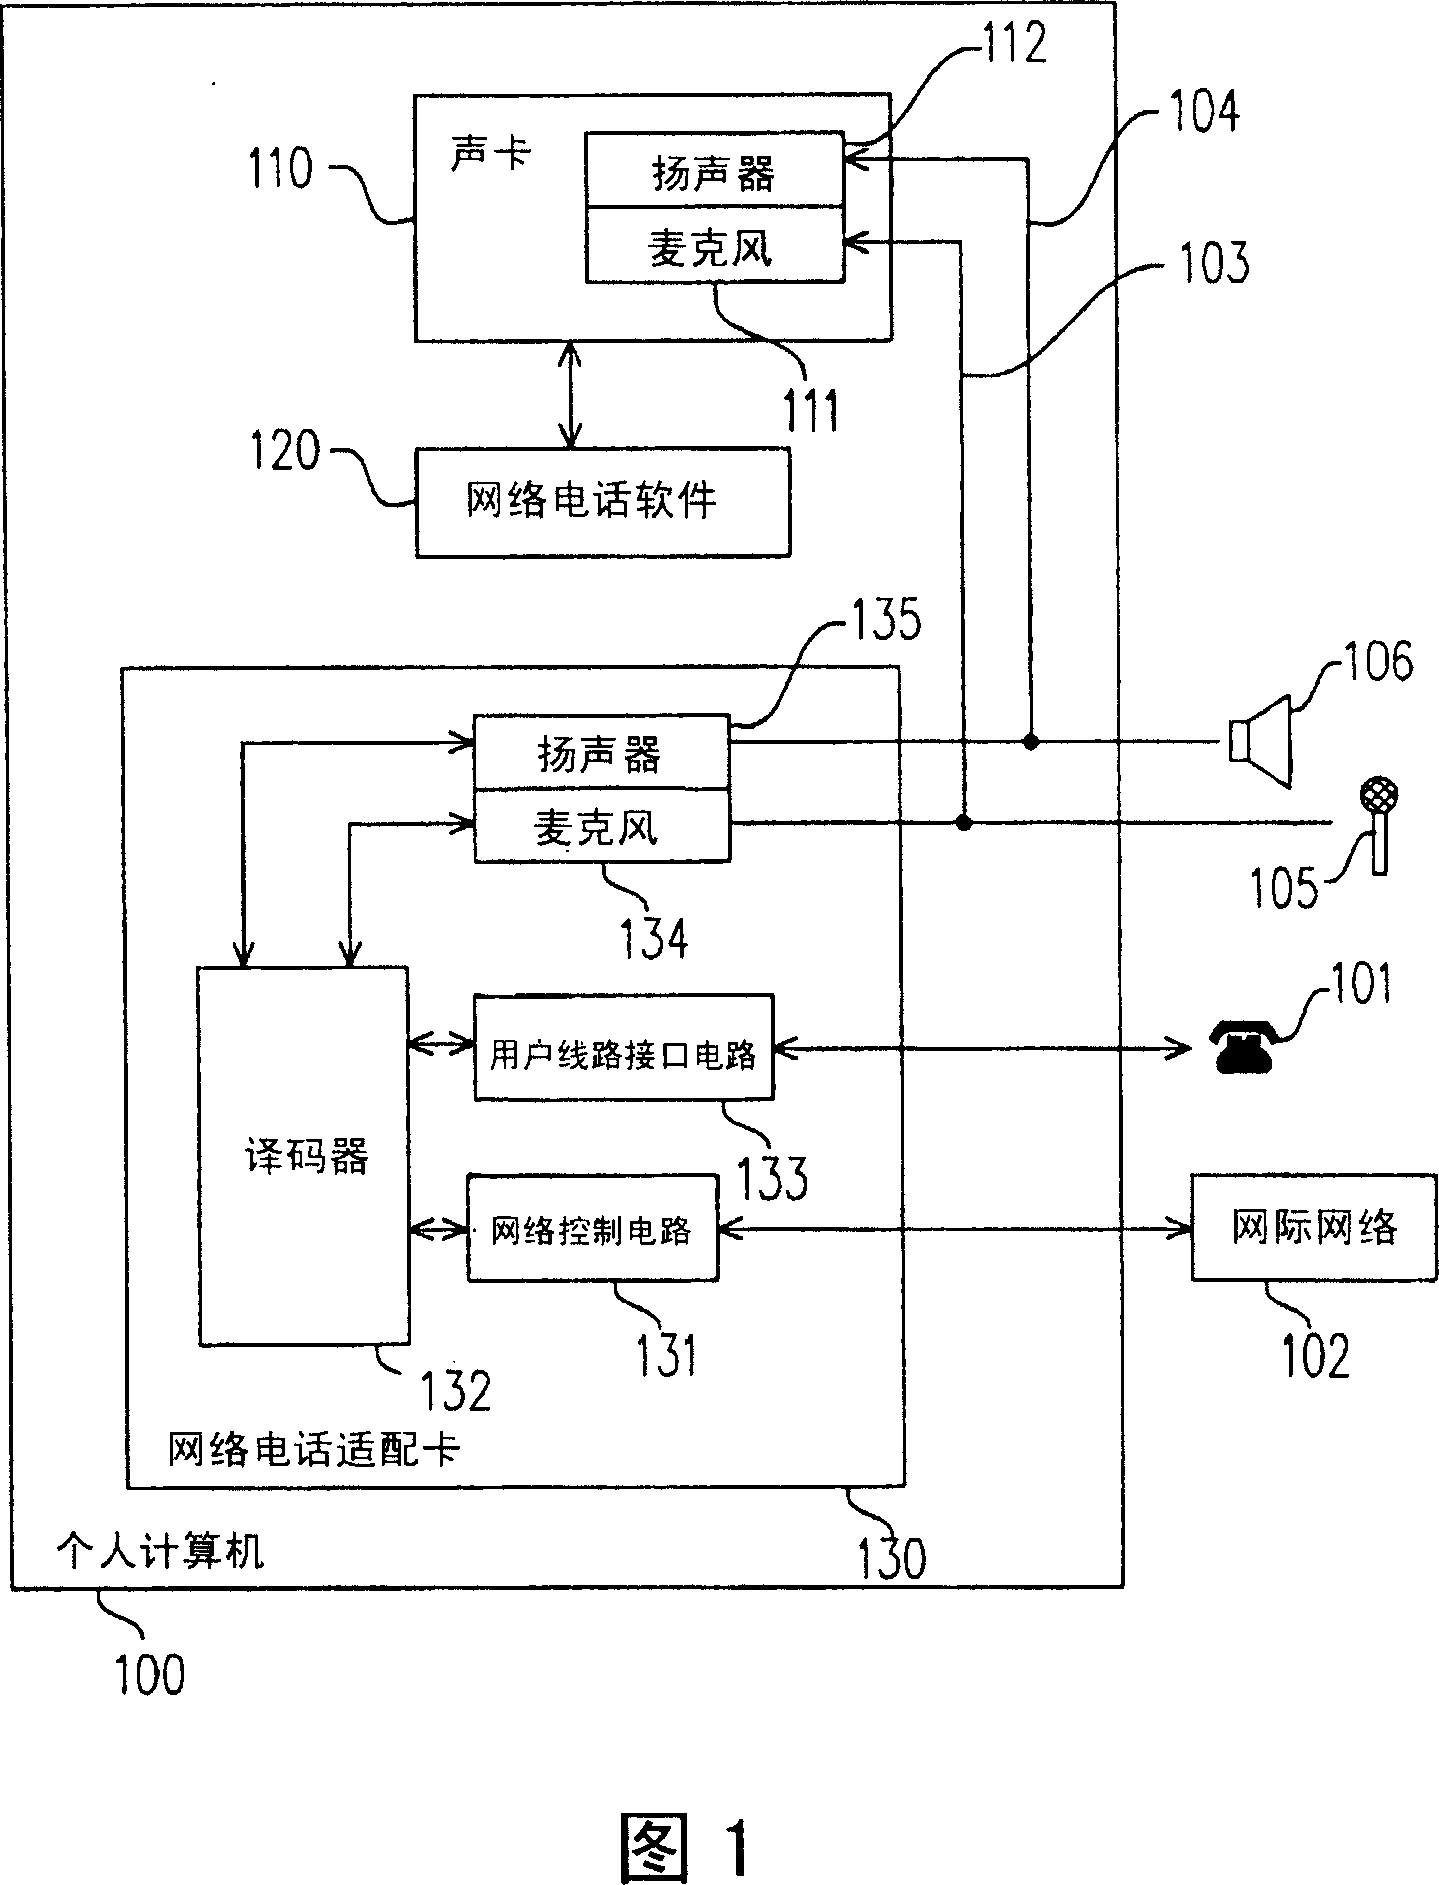 Network talking system and method